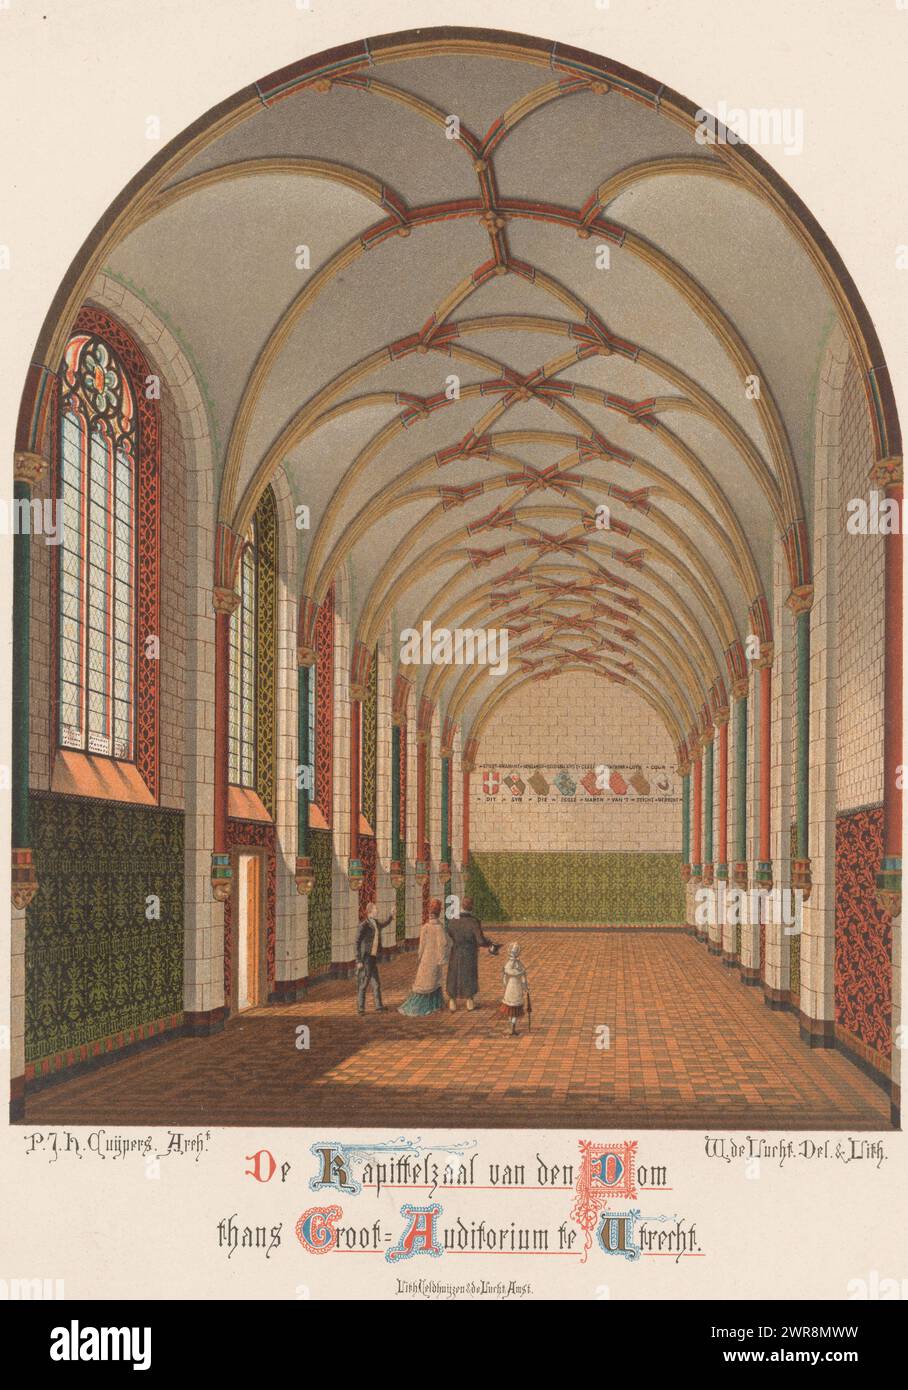 Chapter House of the Cathedral in Utrecht, The Chapter House of the Cathedral, now the Great Auditorium in Utrecht (title on object), Image of the Chapter House of the Cathedral of Utrecht with attached text pages., print maker: Willem de Lucht, after own design by: Willem de Lucht, printer: Veldhuijzen & de Lucht, Haarlem, 1881, paper, letterpress printing, height 278 mm × width 177 mm, print Stock Photo